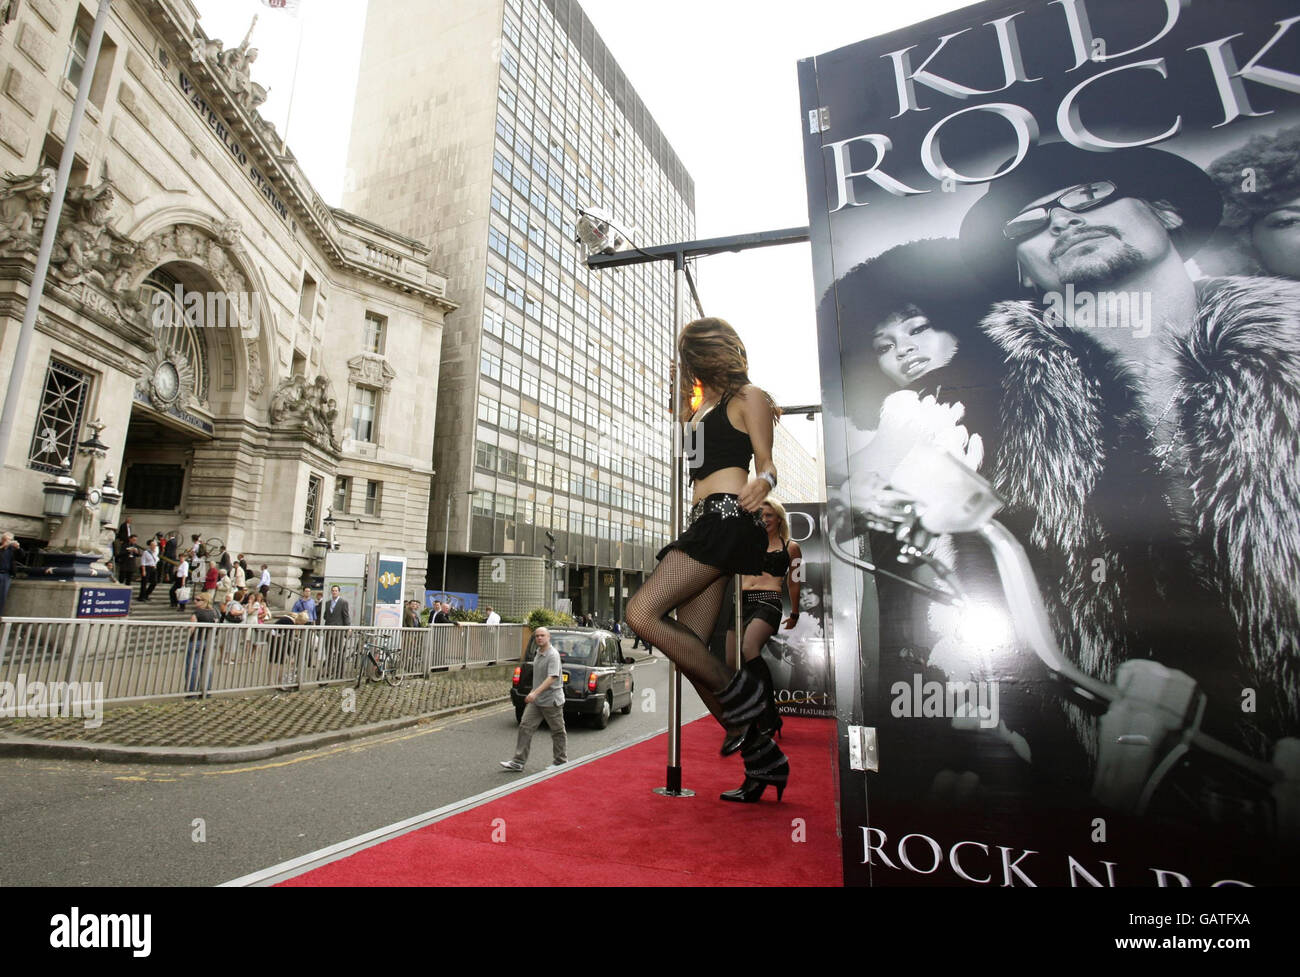 Pole dancers perform on the back of a truck to advertise the new single 'All Summer Long' by American singer Kid Rock, outside Waterloo Station in central London. Stock Photo